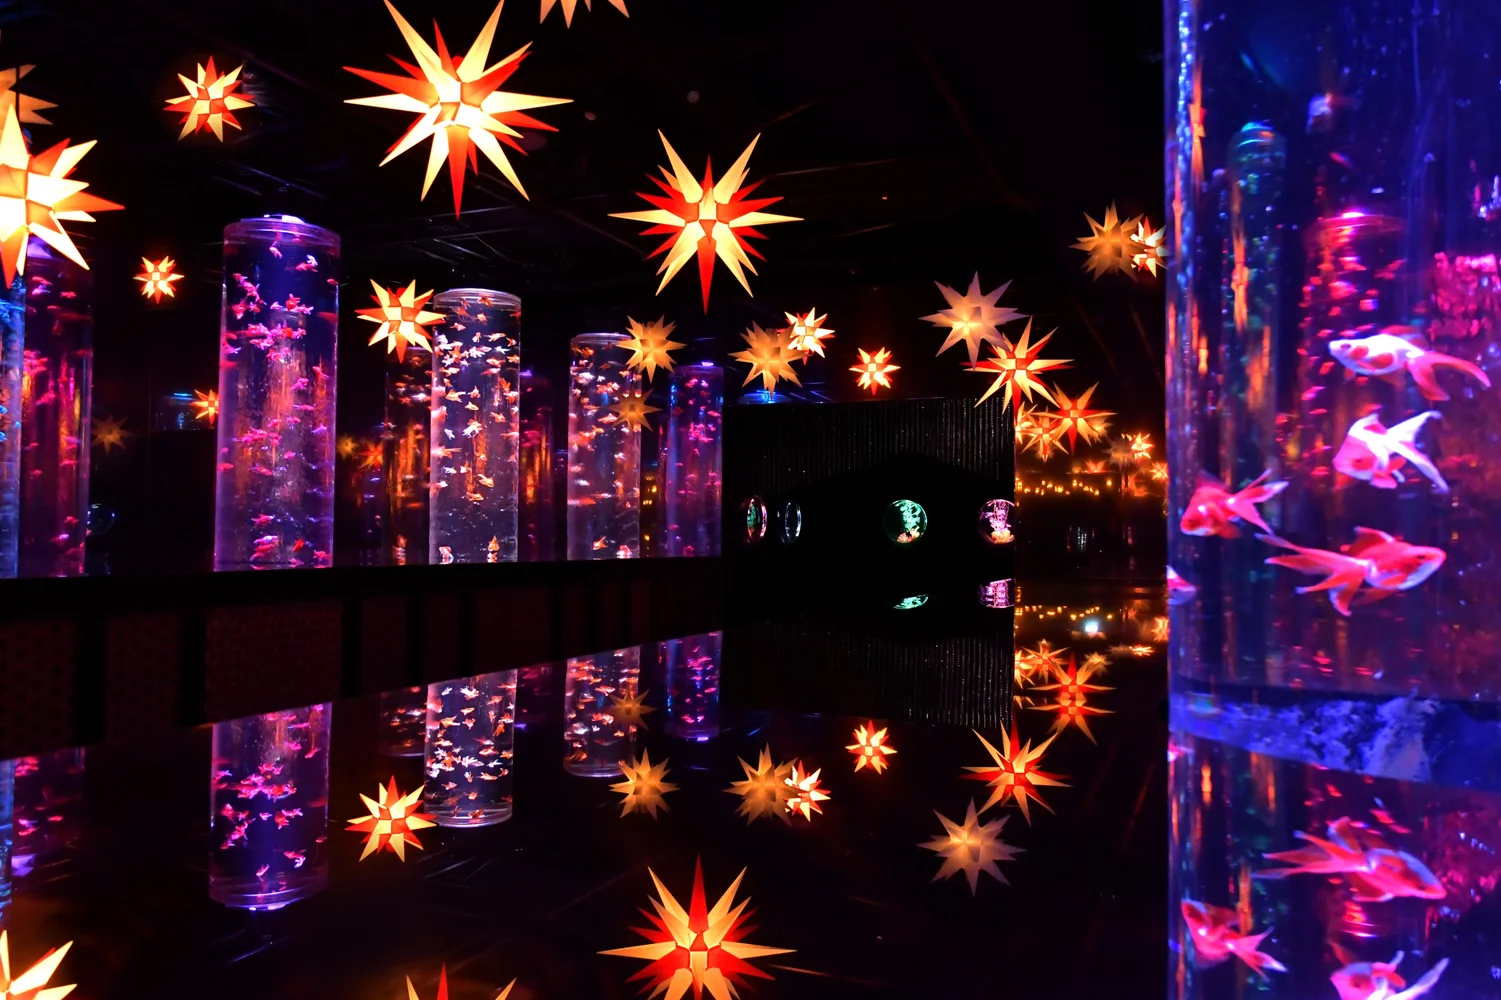 Winter exhibition "Starry Ginza Christmas" will be held from November 23 (Thu) to December 27 (Wed)